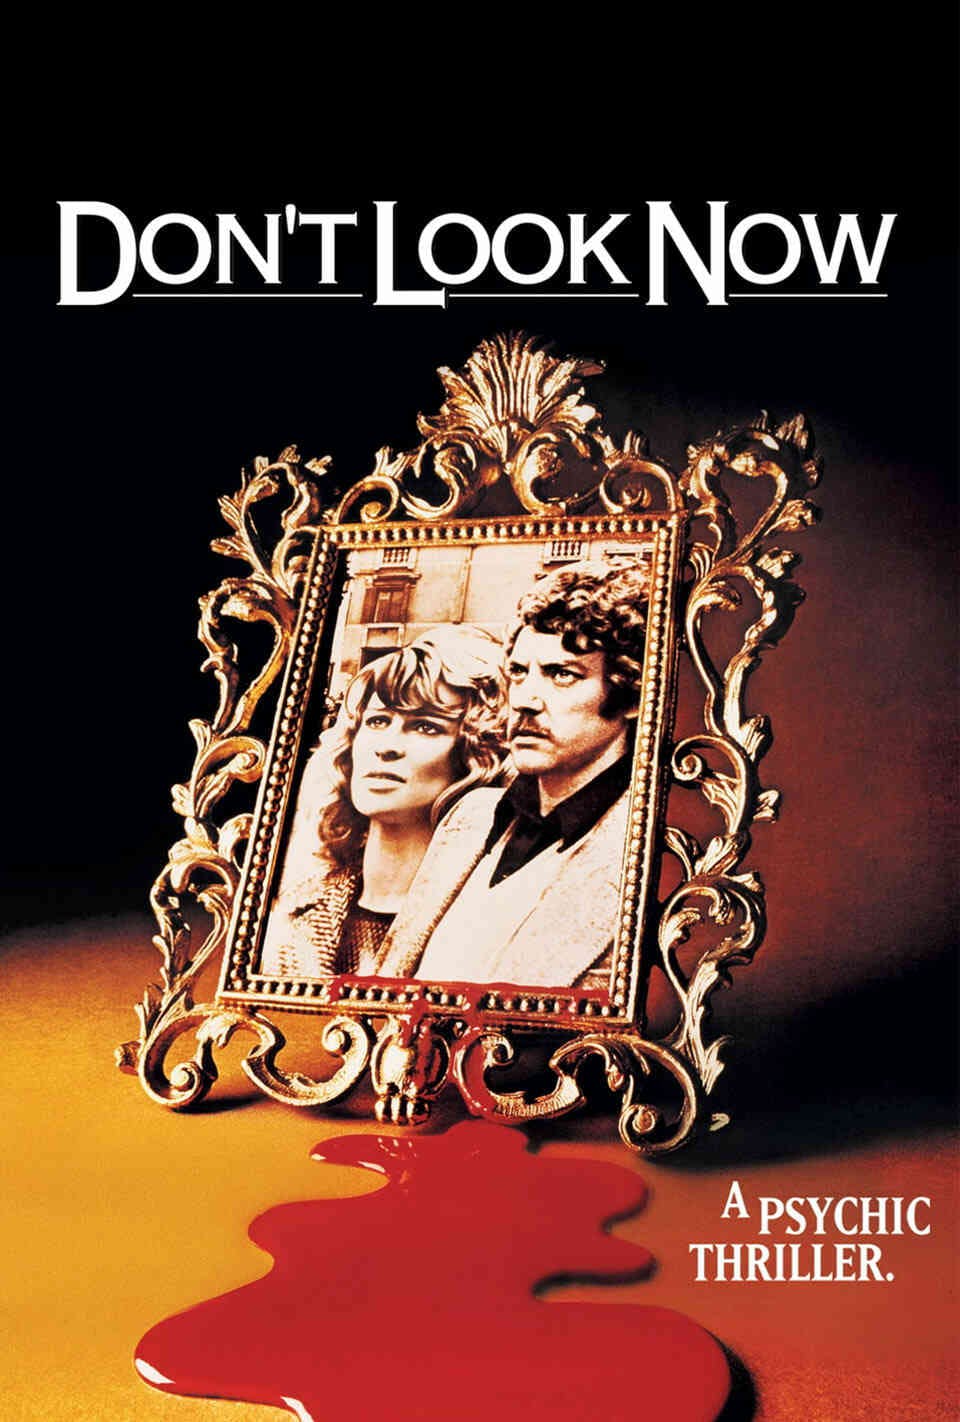 Read Don't Look Now screenplay.